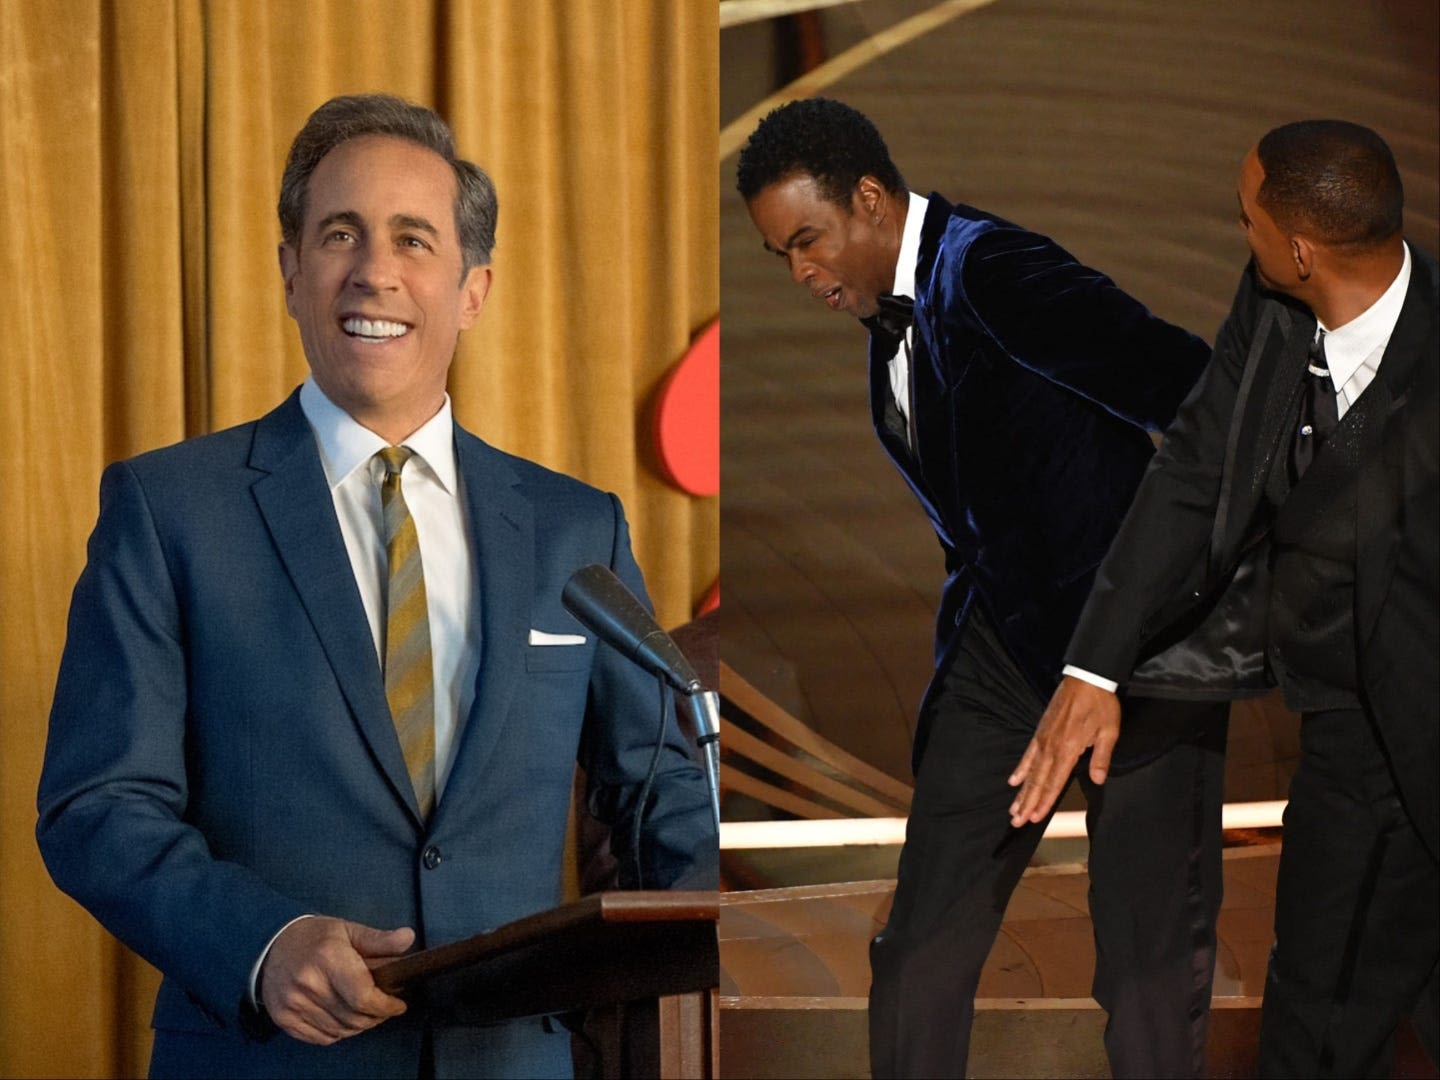 Jerry Seinfeld asked Chris Rock to recreate the Will Smith Oscars slap for his Netflix movie. Rock turned him down.